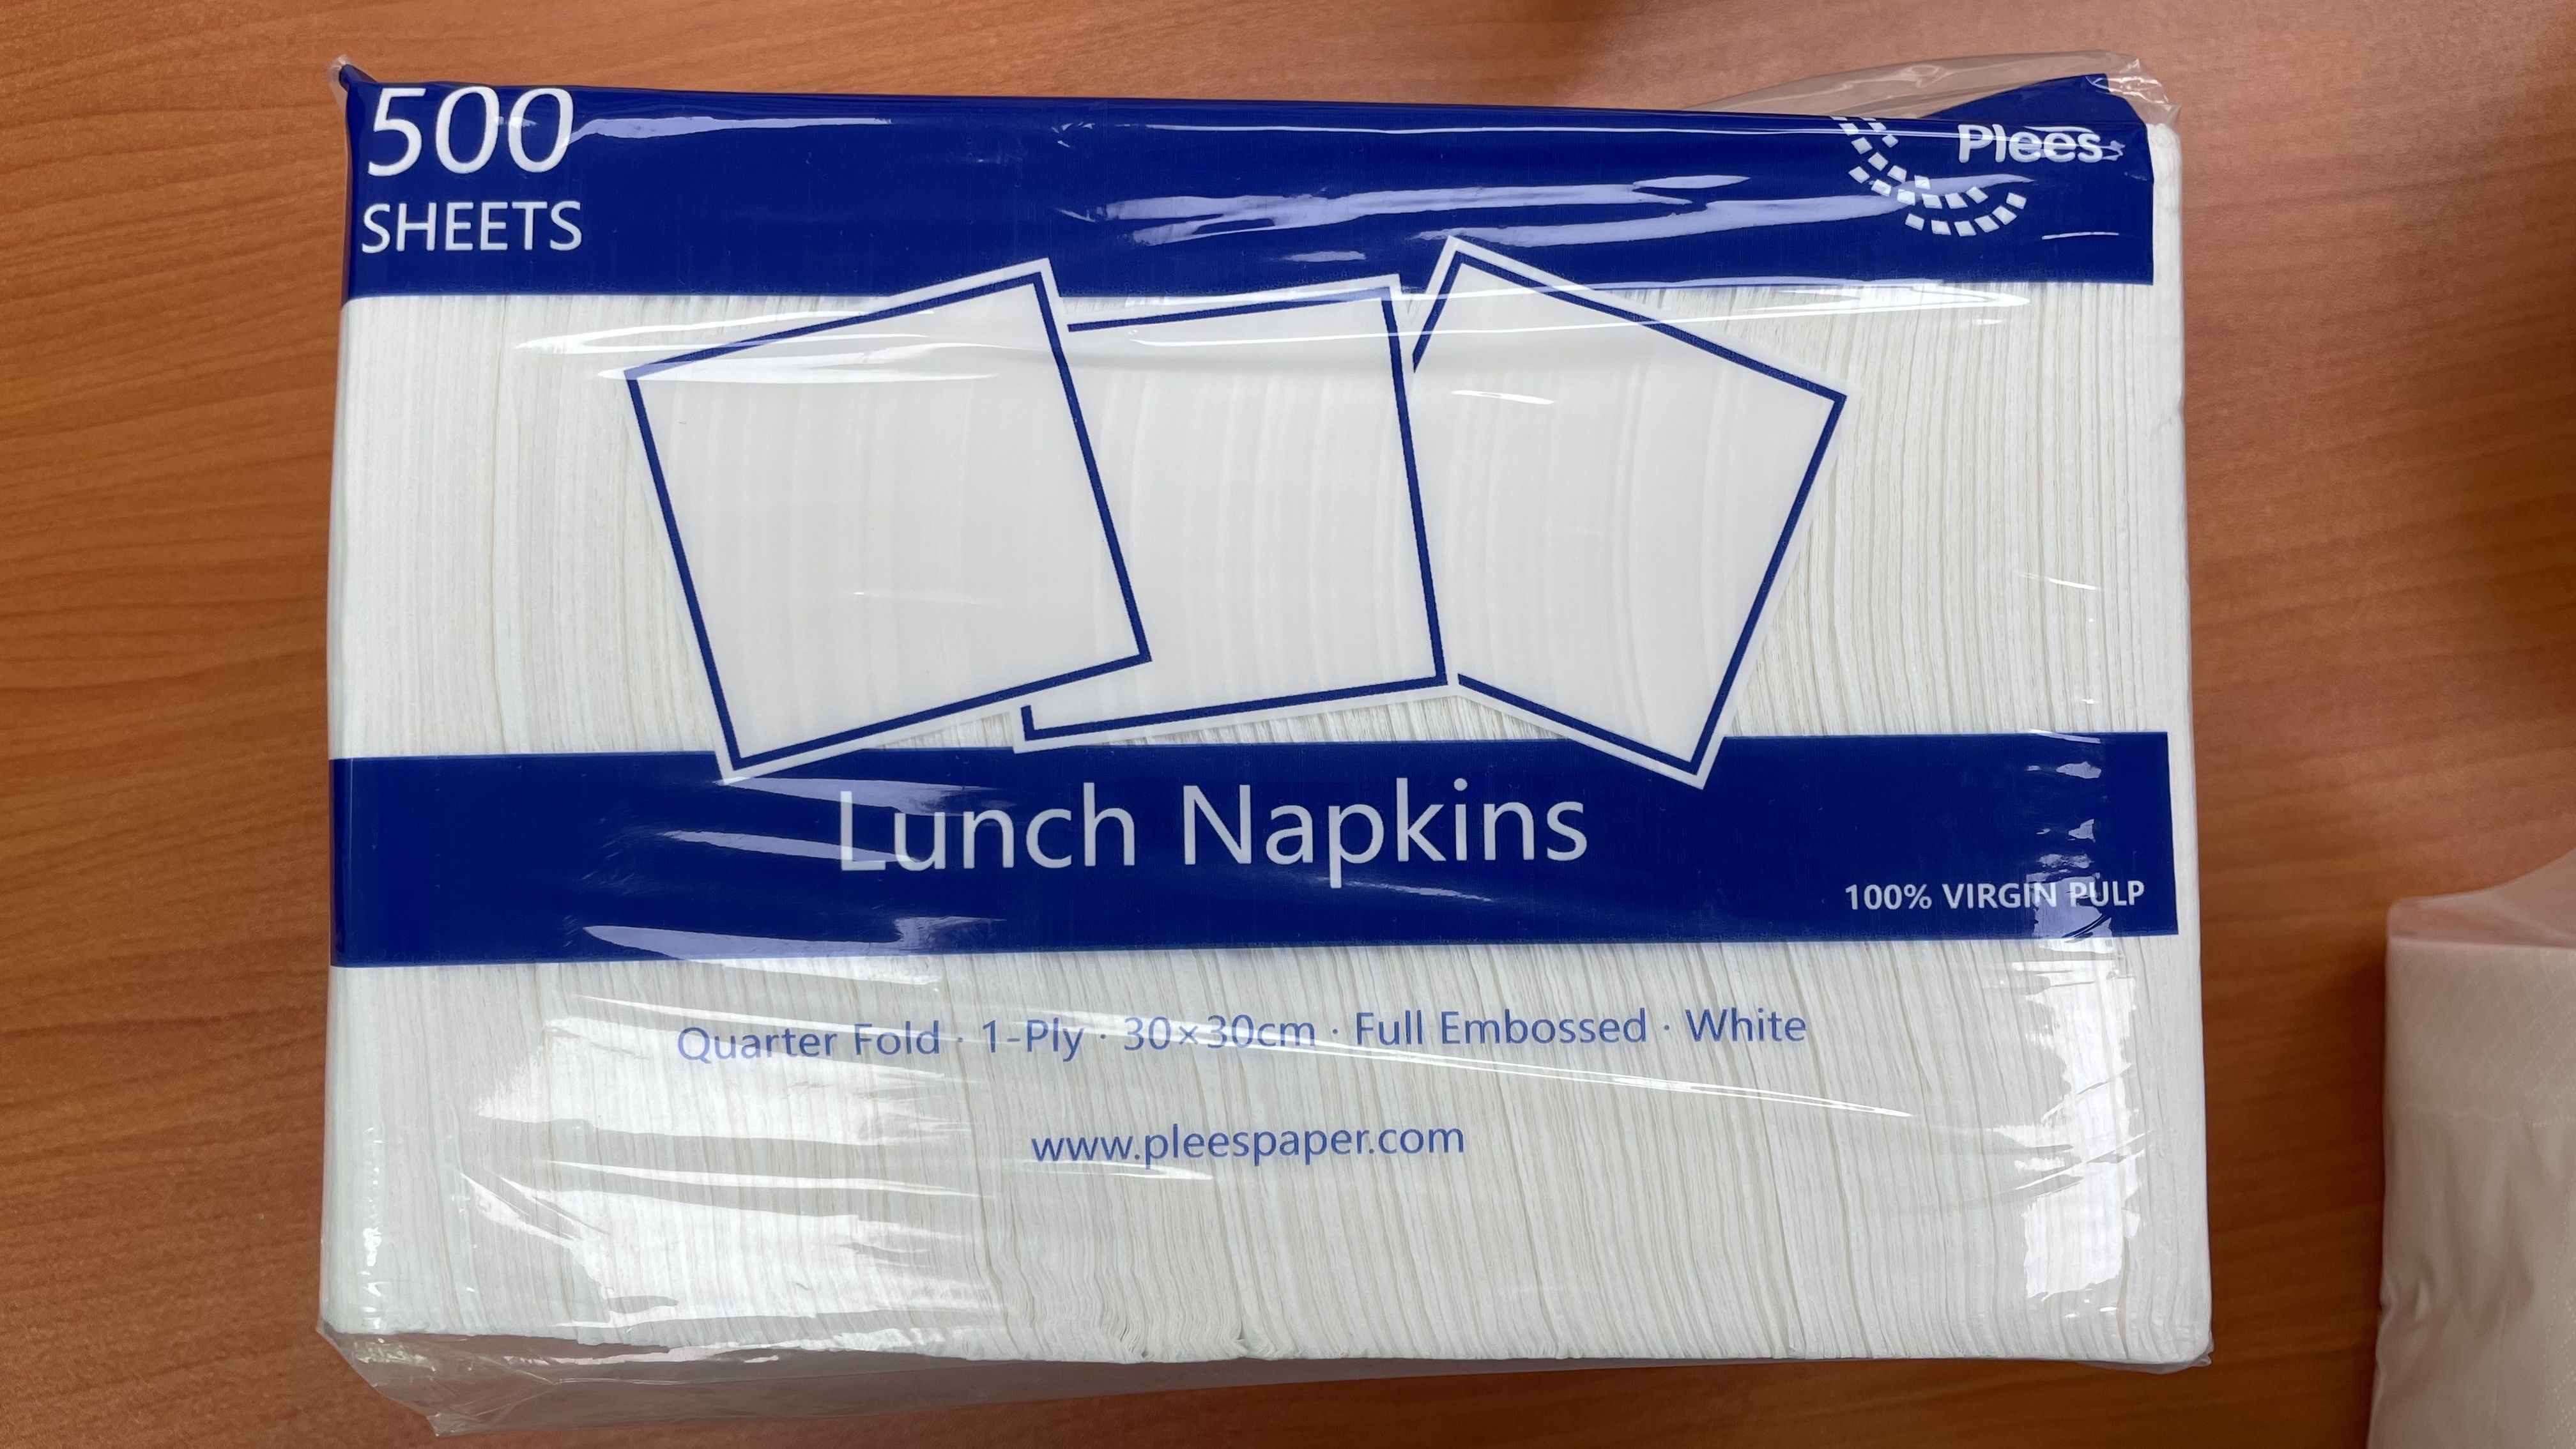 What? This Is A Napkin That You Are Using But Don't Fully Understand